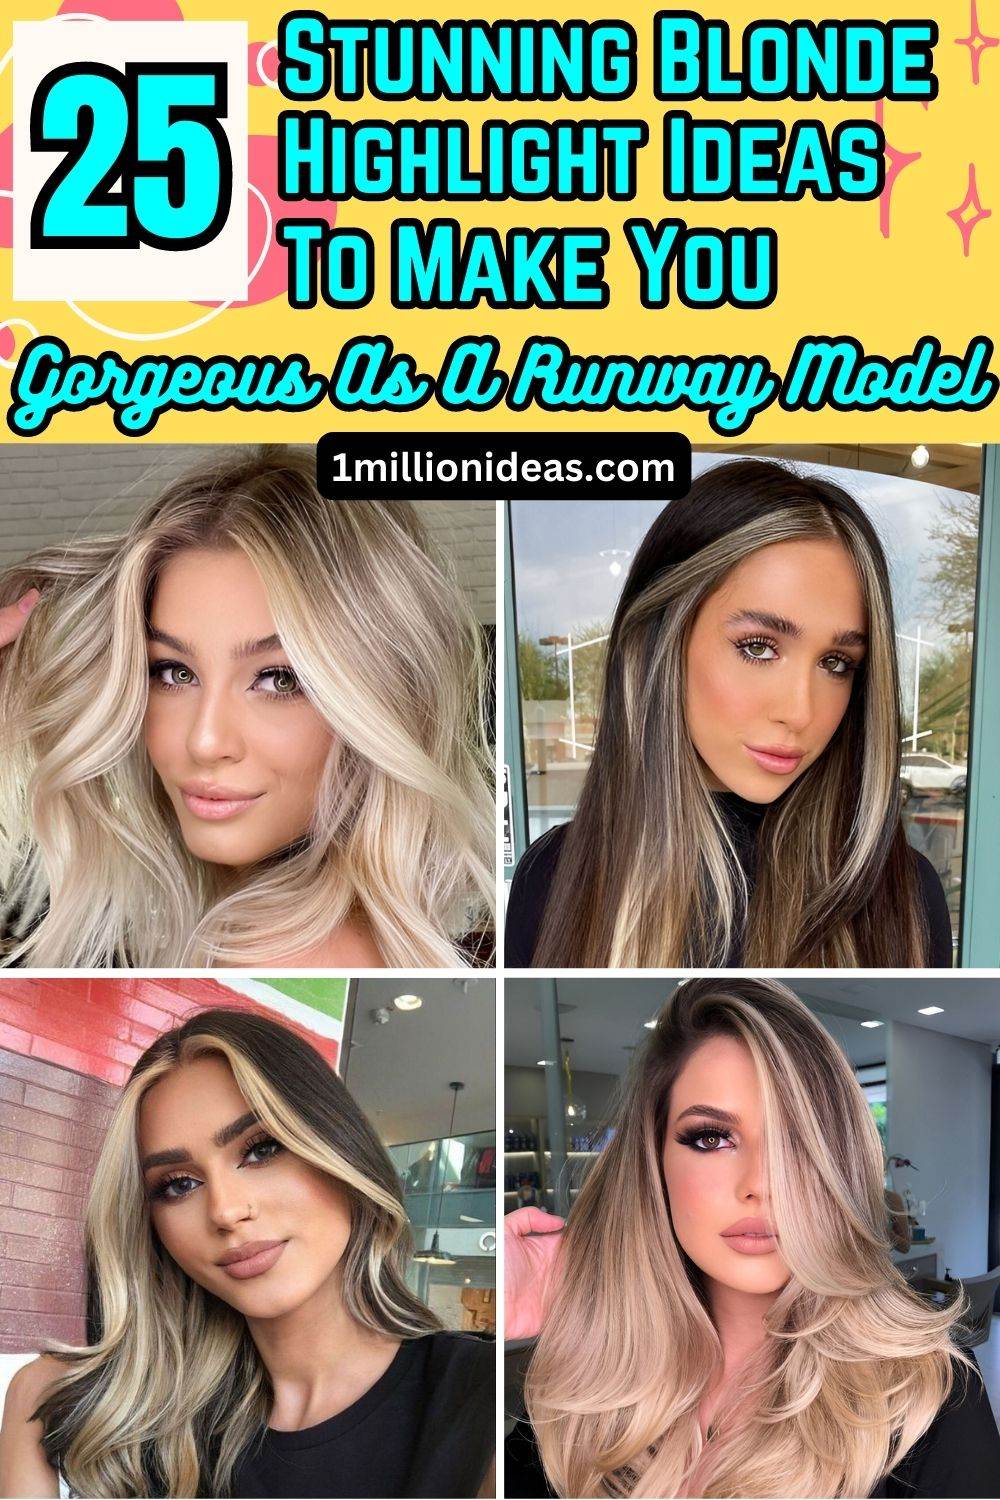 25 Stunning Blonde Highlight Ideas To Make You Gorgeous As A Runway Model - 161